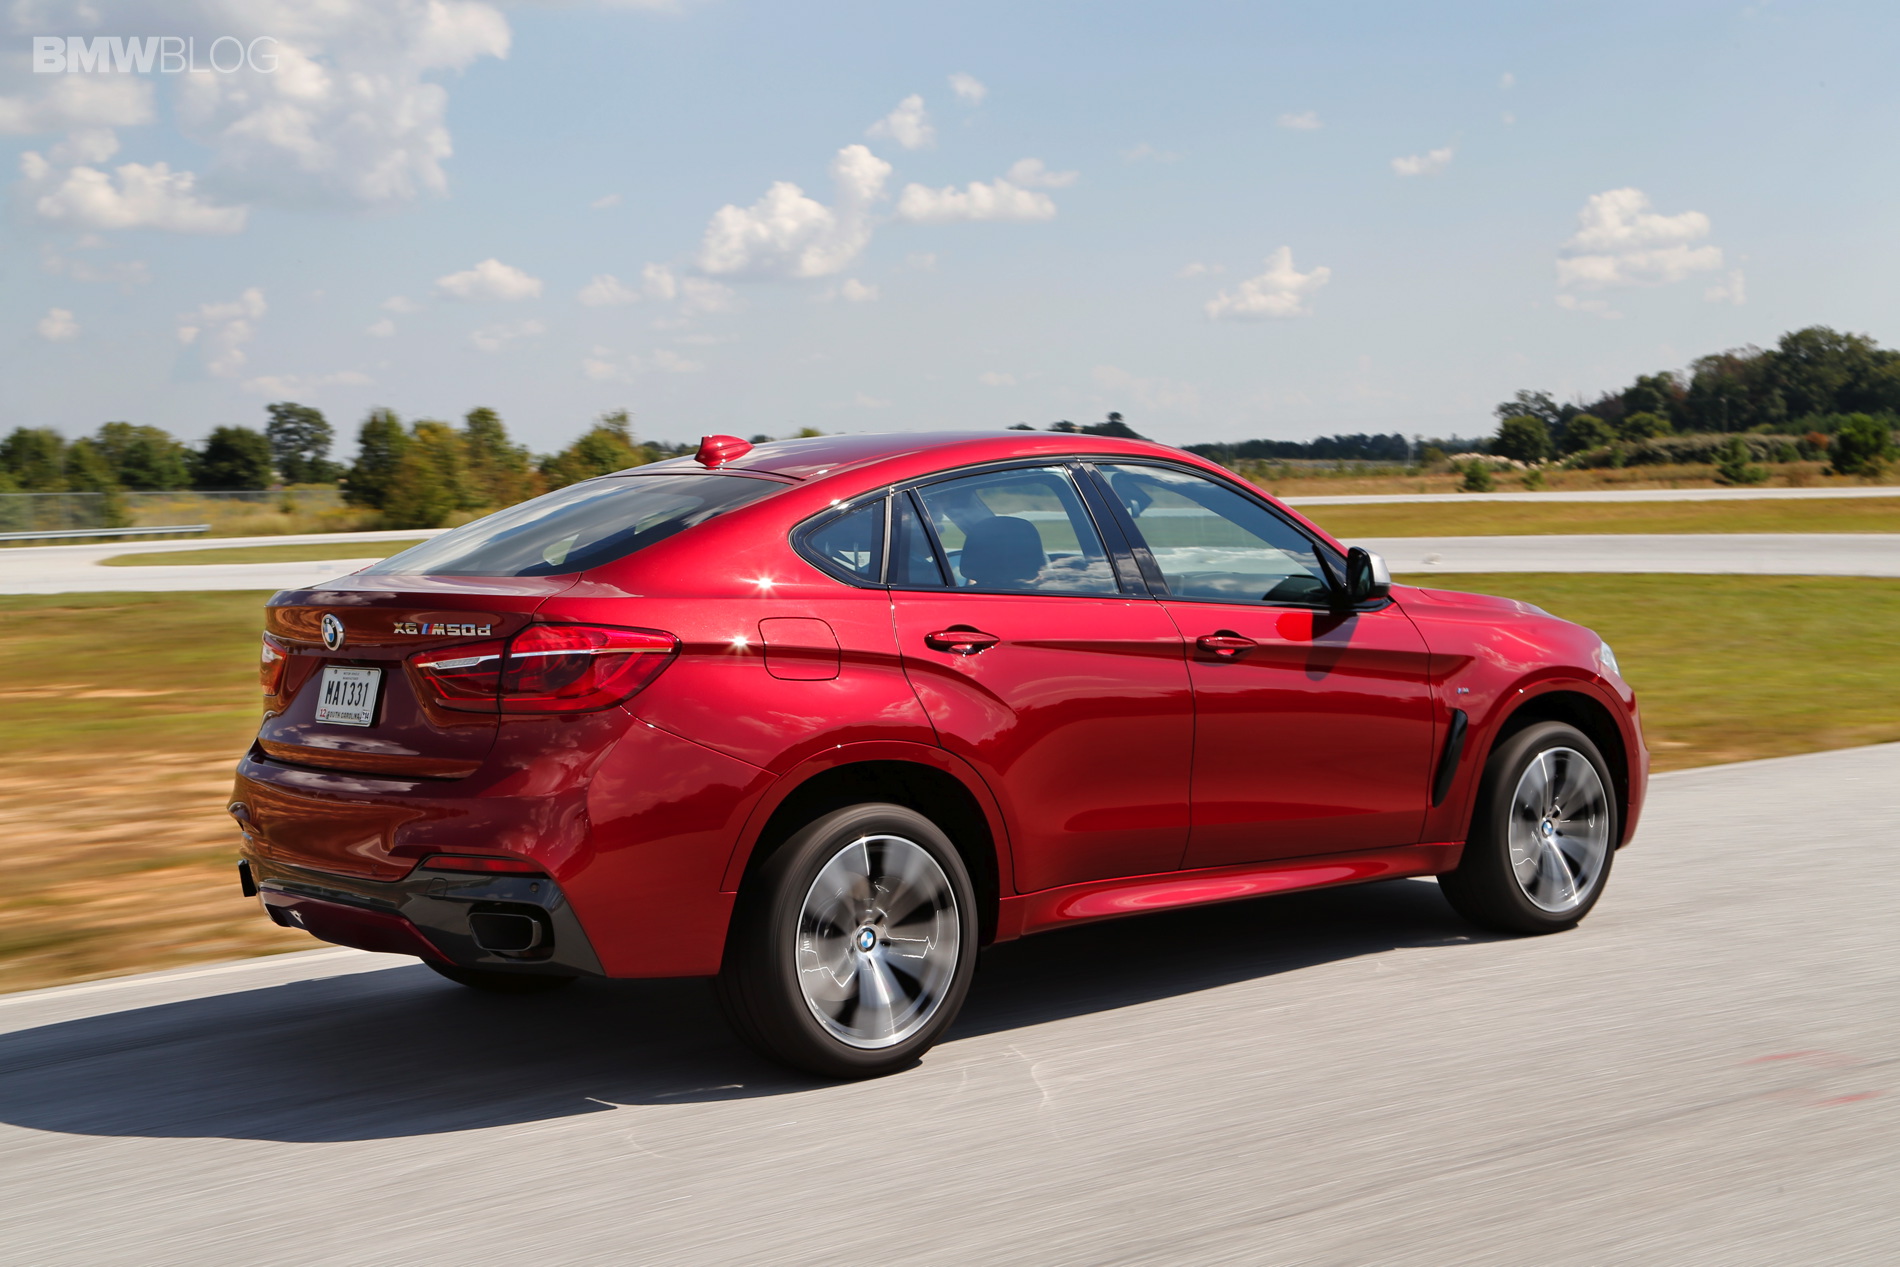 Top gear review of bmw x6